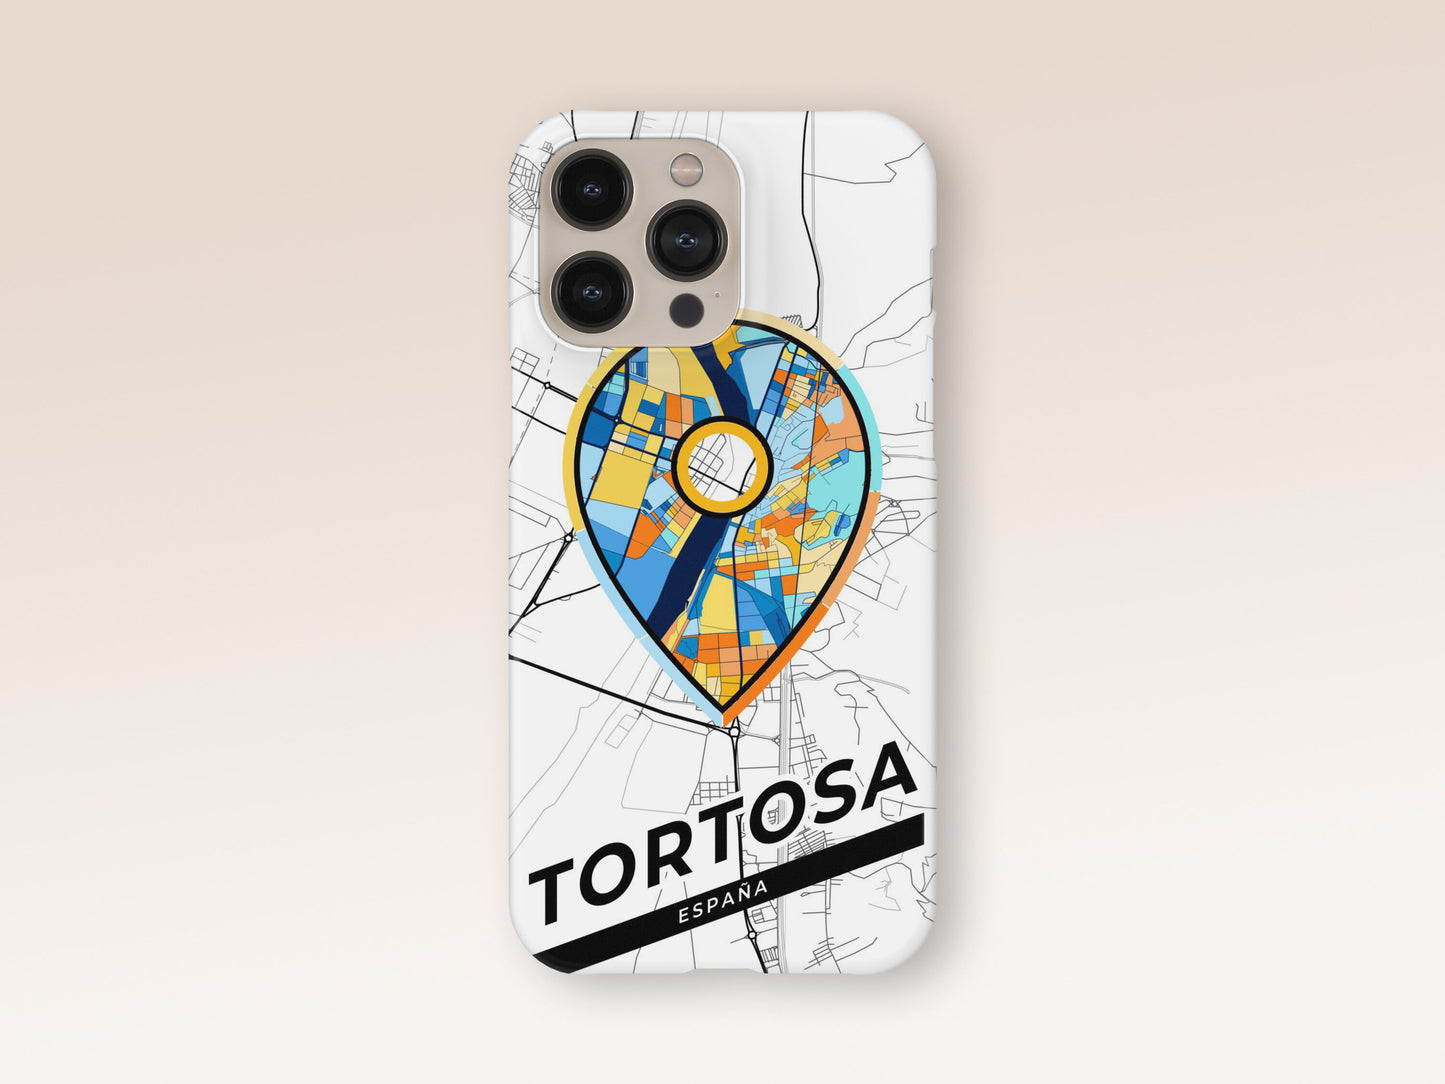 Tortosa Spain slim phone case with colorful icon. Birthday, wedding or housewarming gift. Couple match cases. 1